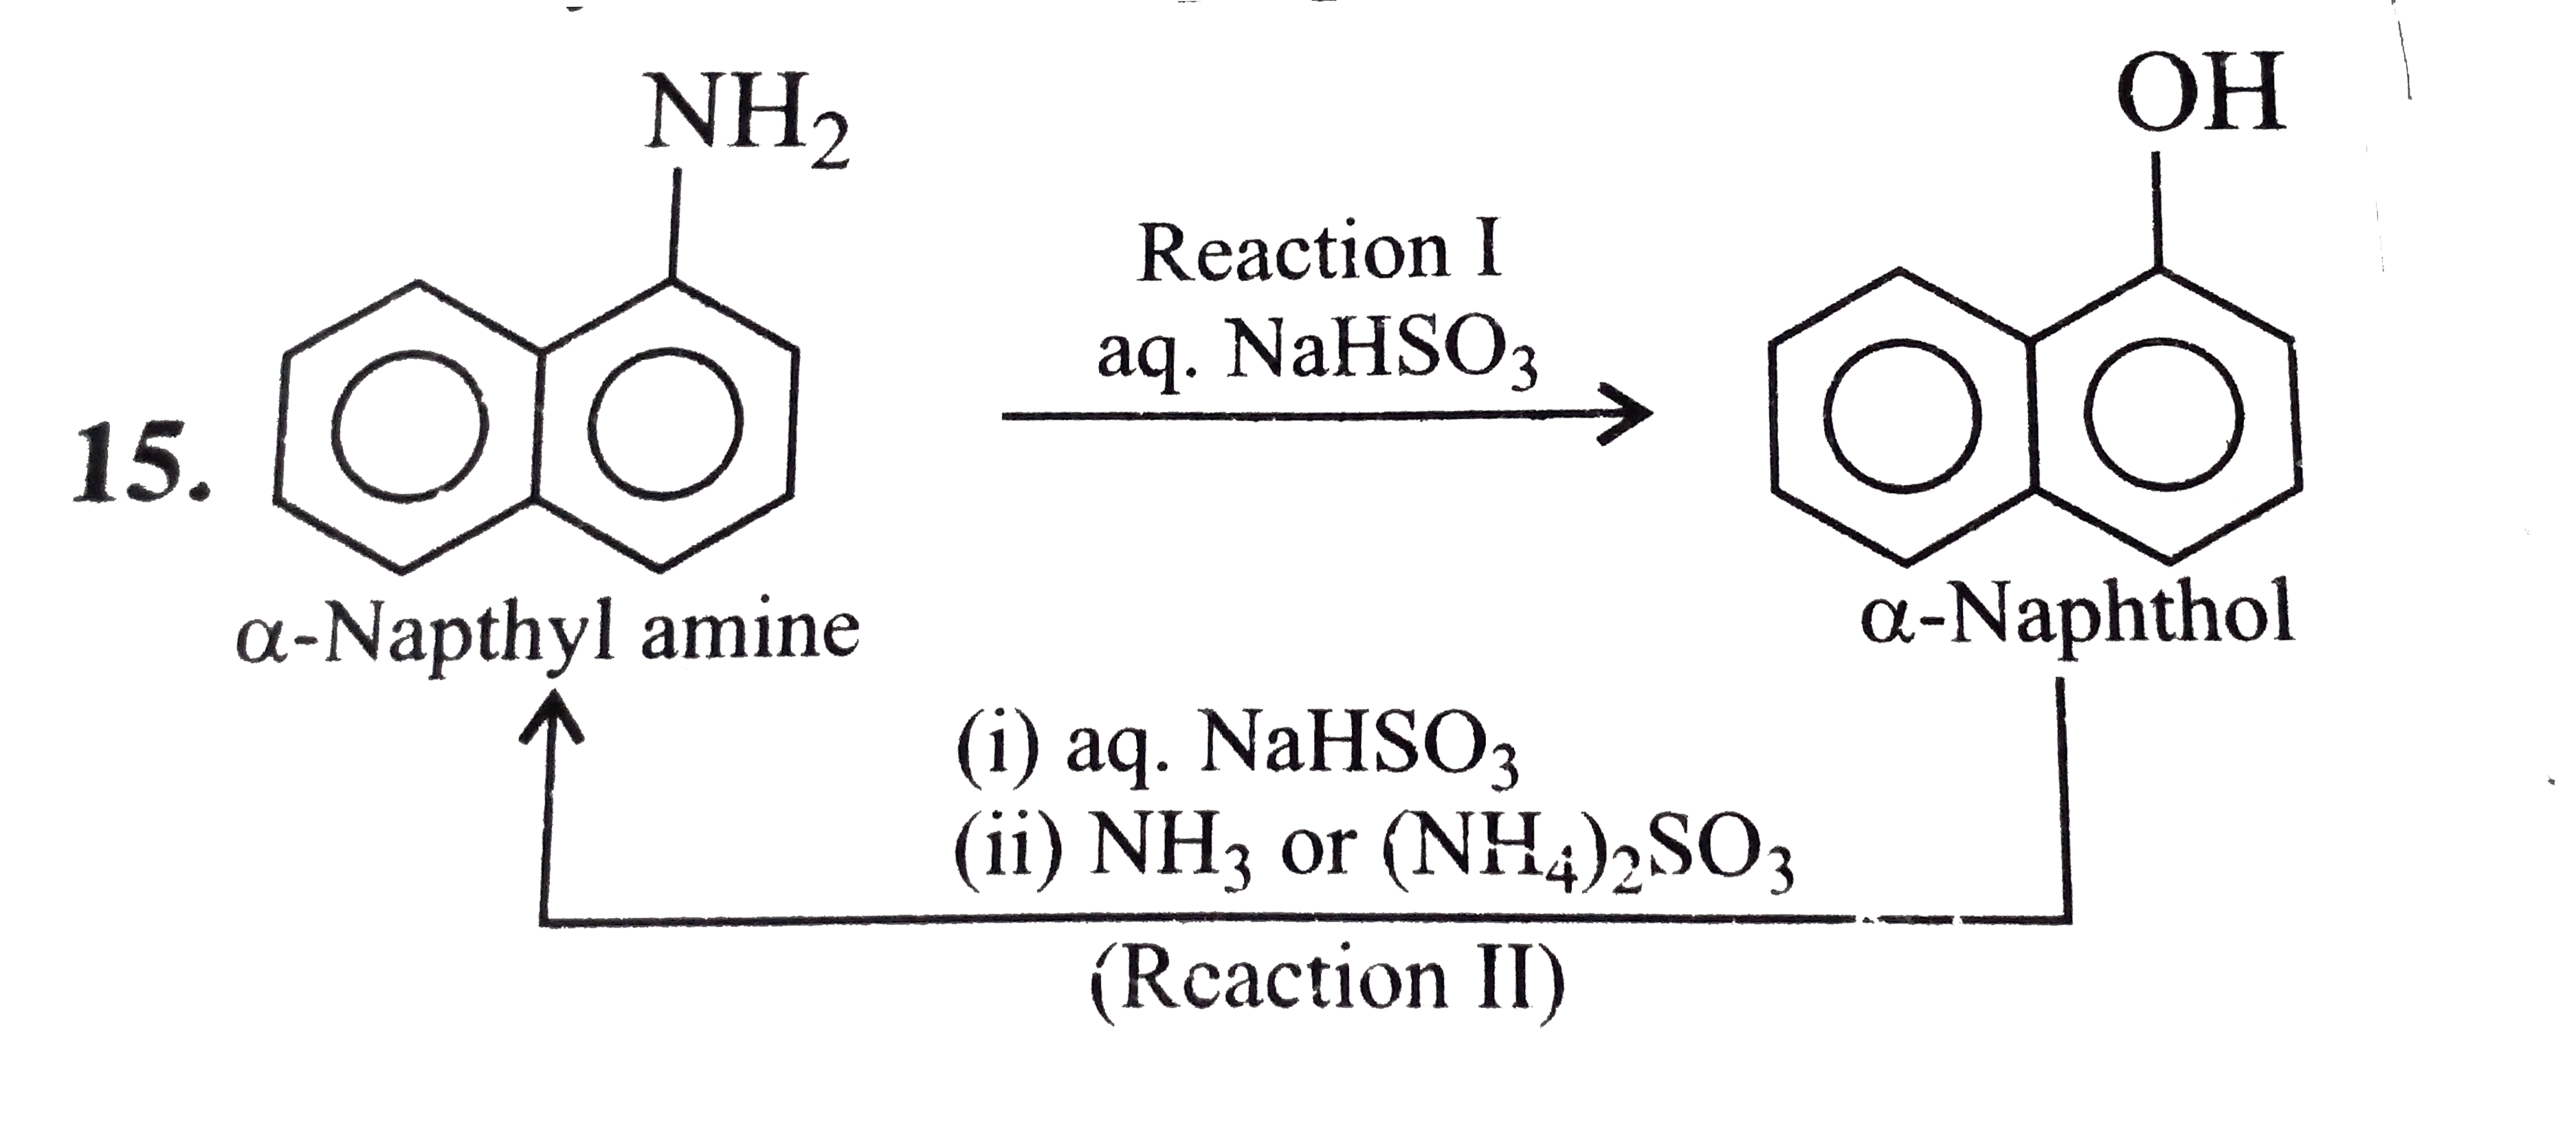 reactions I and II are limited mainly to naphthalene compounds. These reactions are called, respectively: